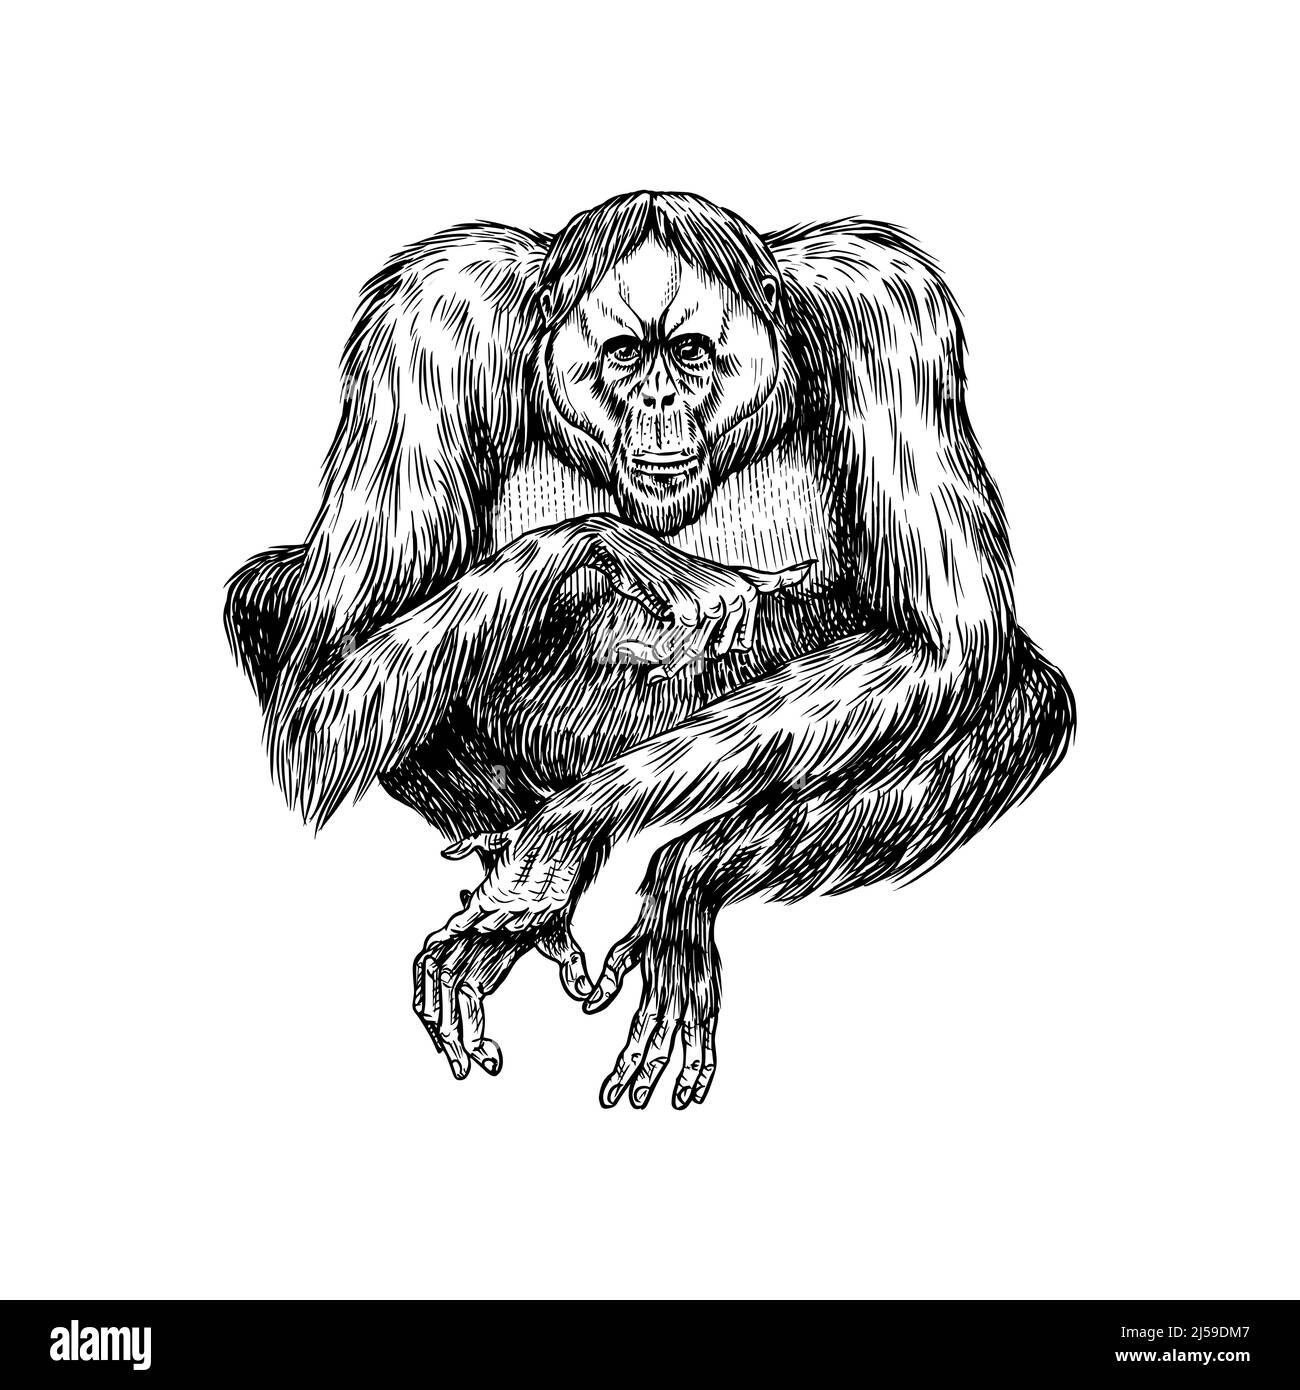 Orangutan in vintage style. Hand drawn engraved sketch in woodcut style. Large intelligent animal with long hair. Stock Vector